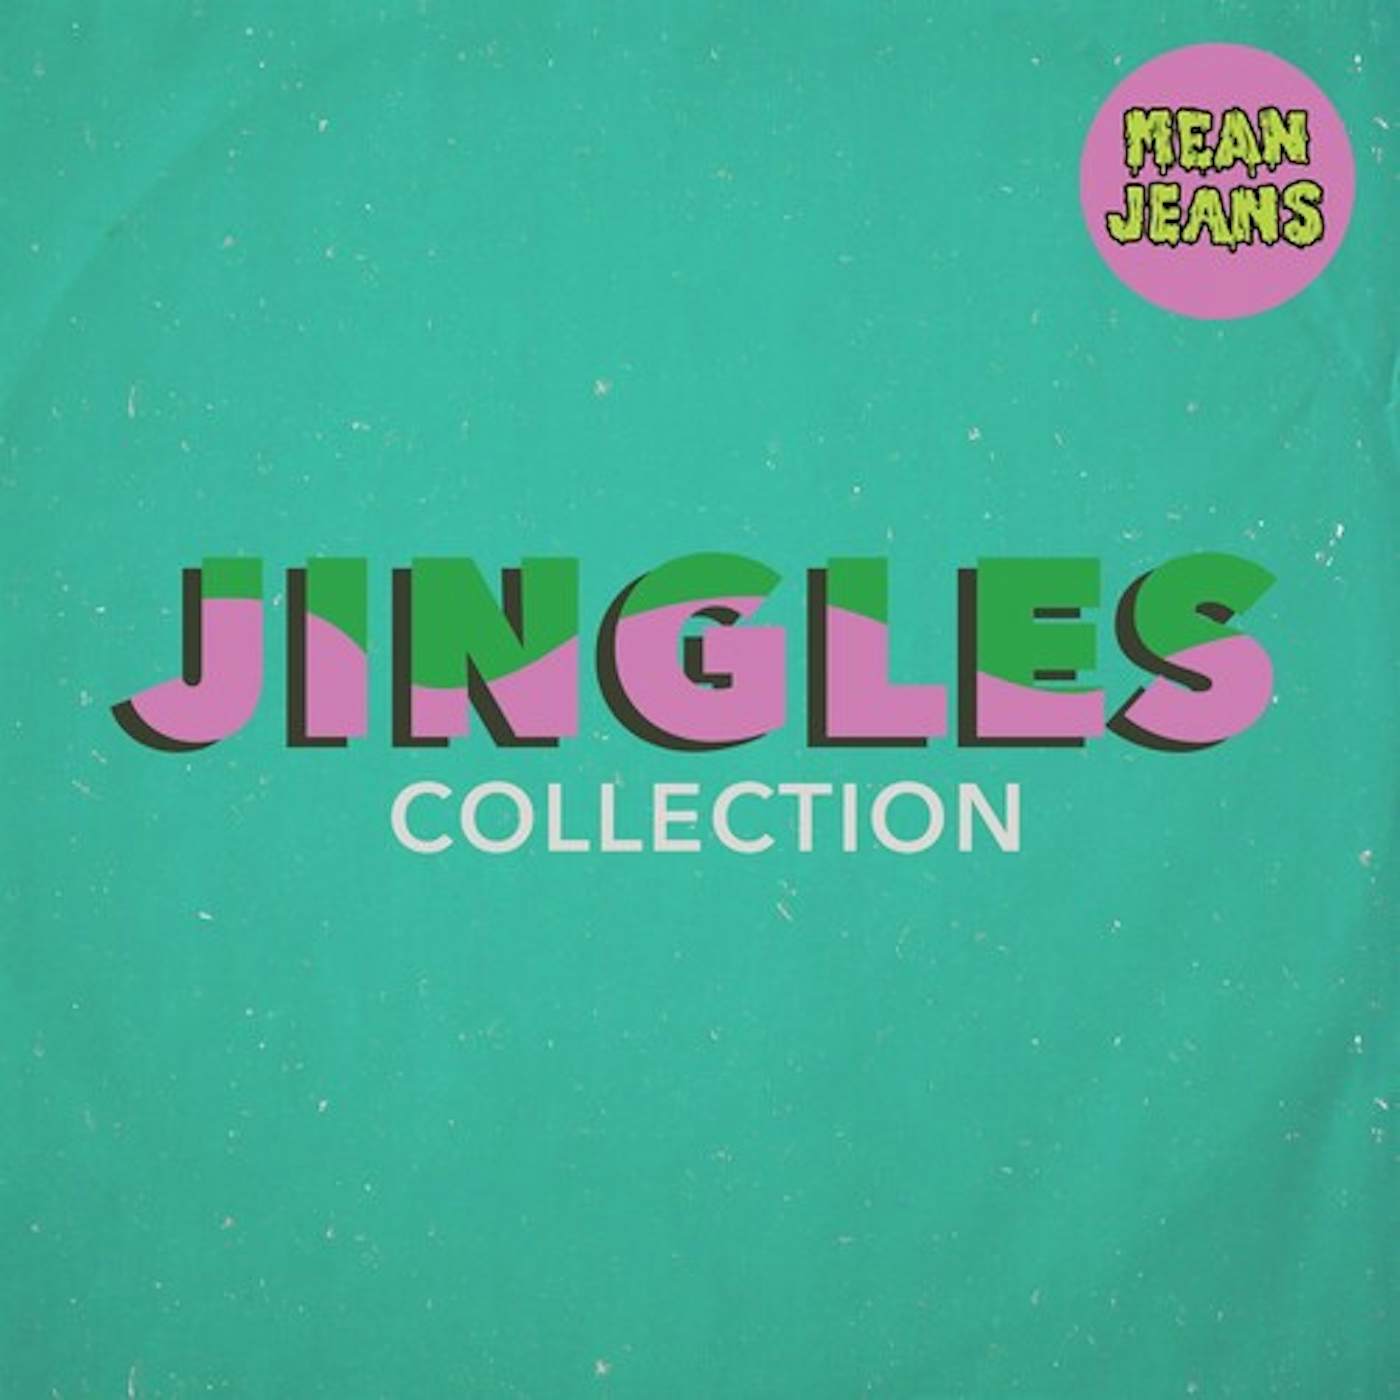 Mean Jeans JINGLES COLLECTION CD